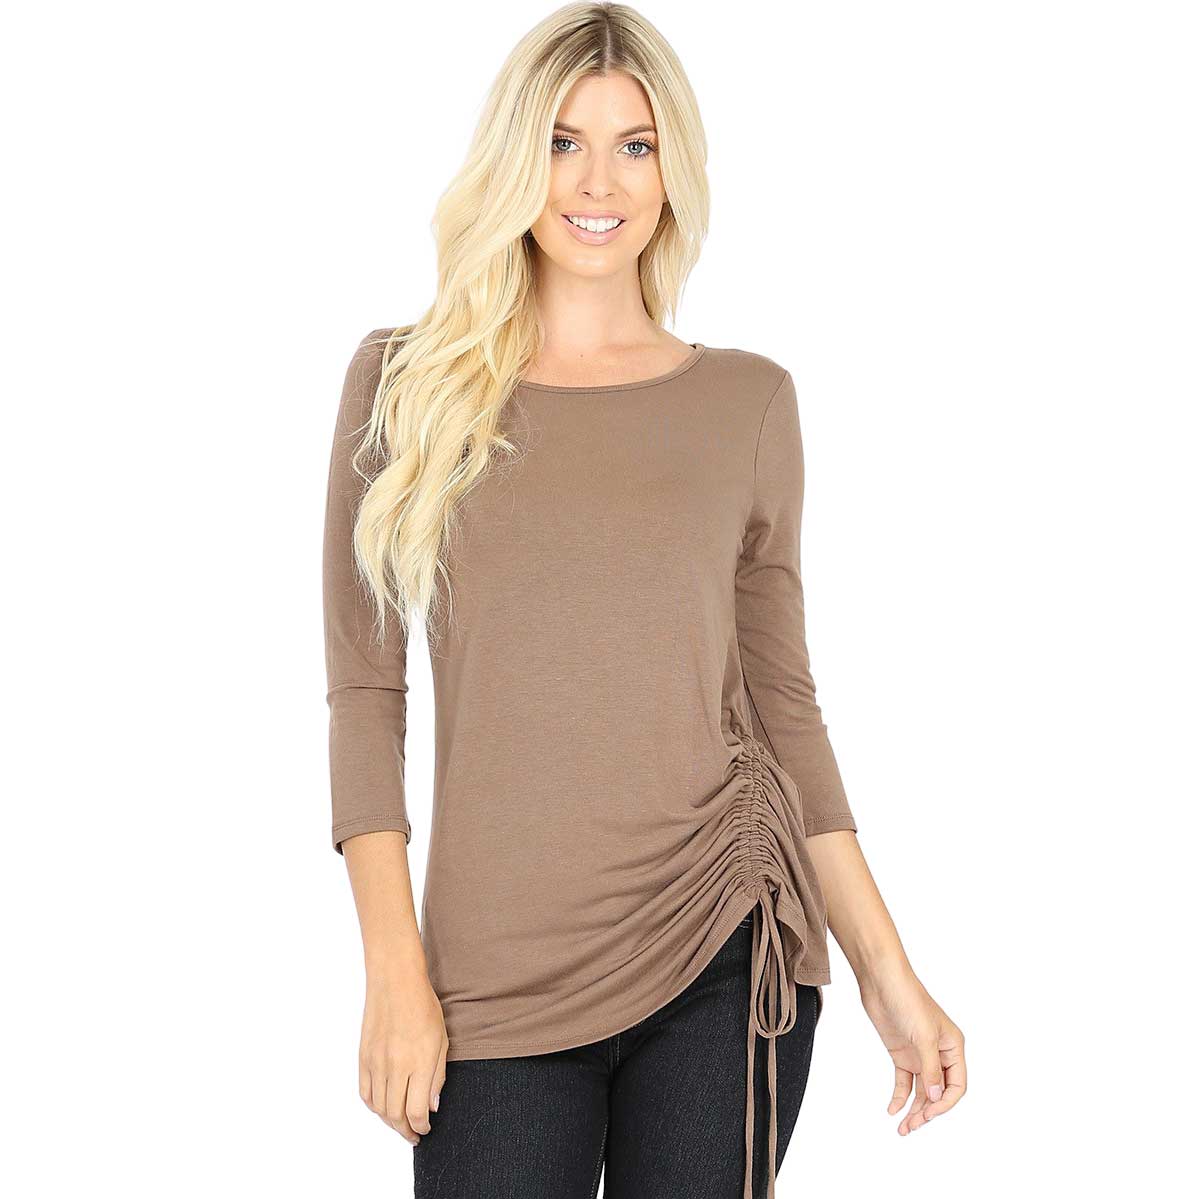 1887 - 3/4 Sleeve Ruched Tops MOCHA 3/4 Sleeve Round Neck Side Ruched 1887 - Medium